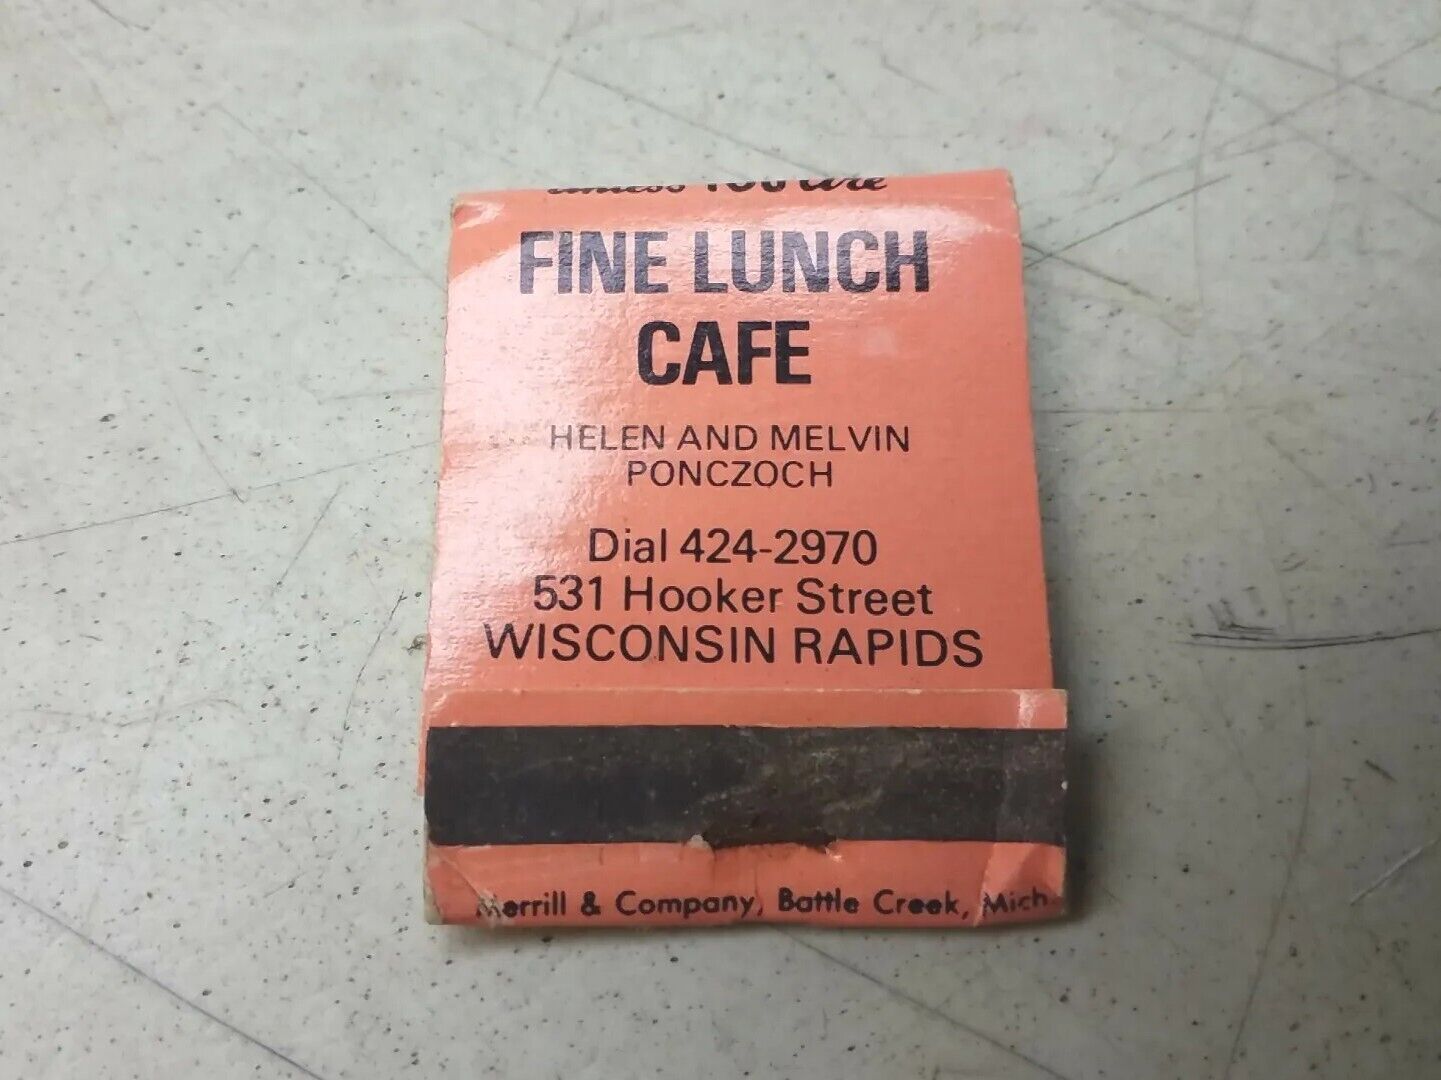 Fine Lunch Cafe Ponczoch Family Wisconsin Rapids Vintage Matchbook Advertising 